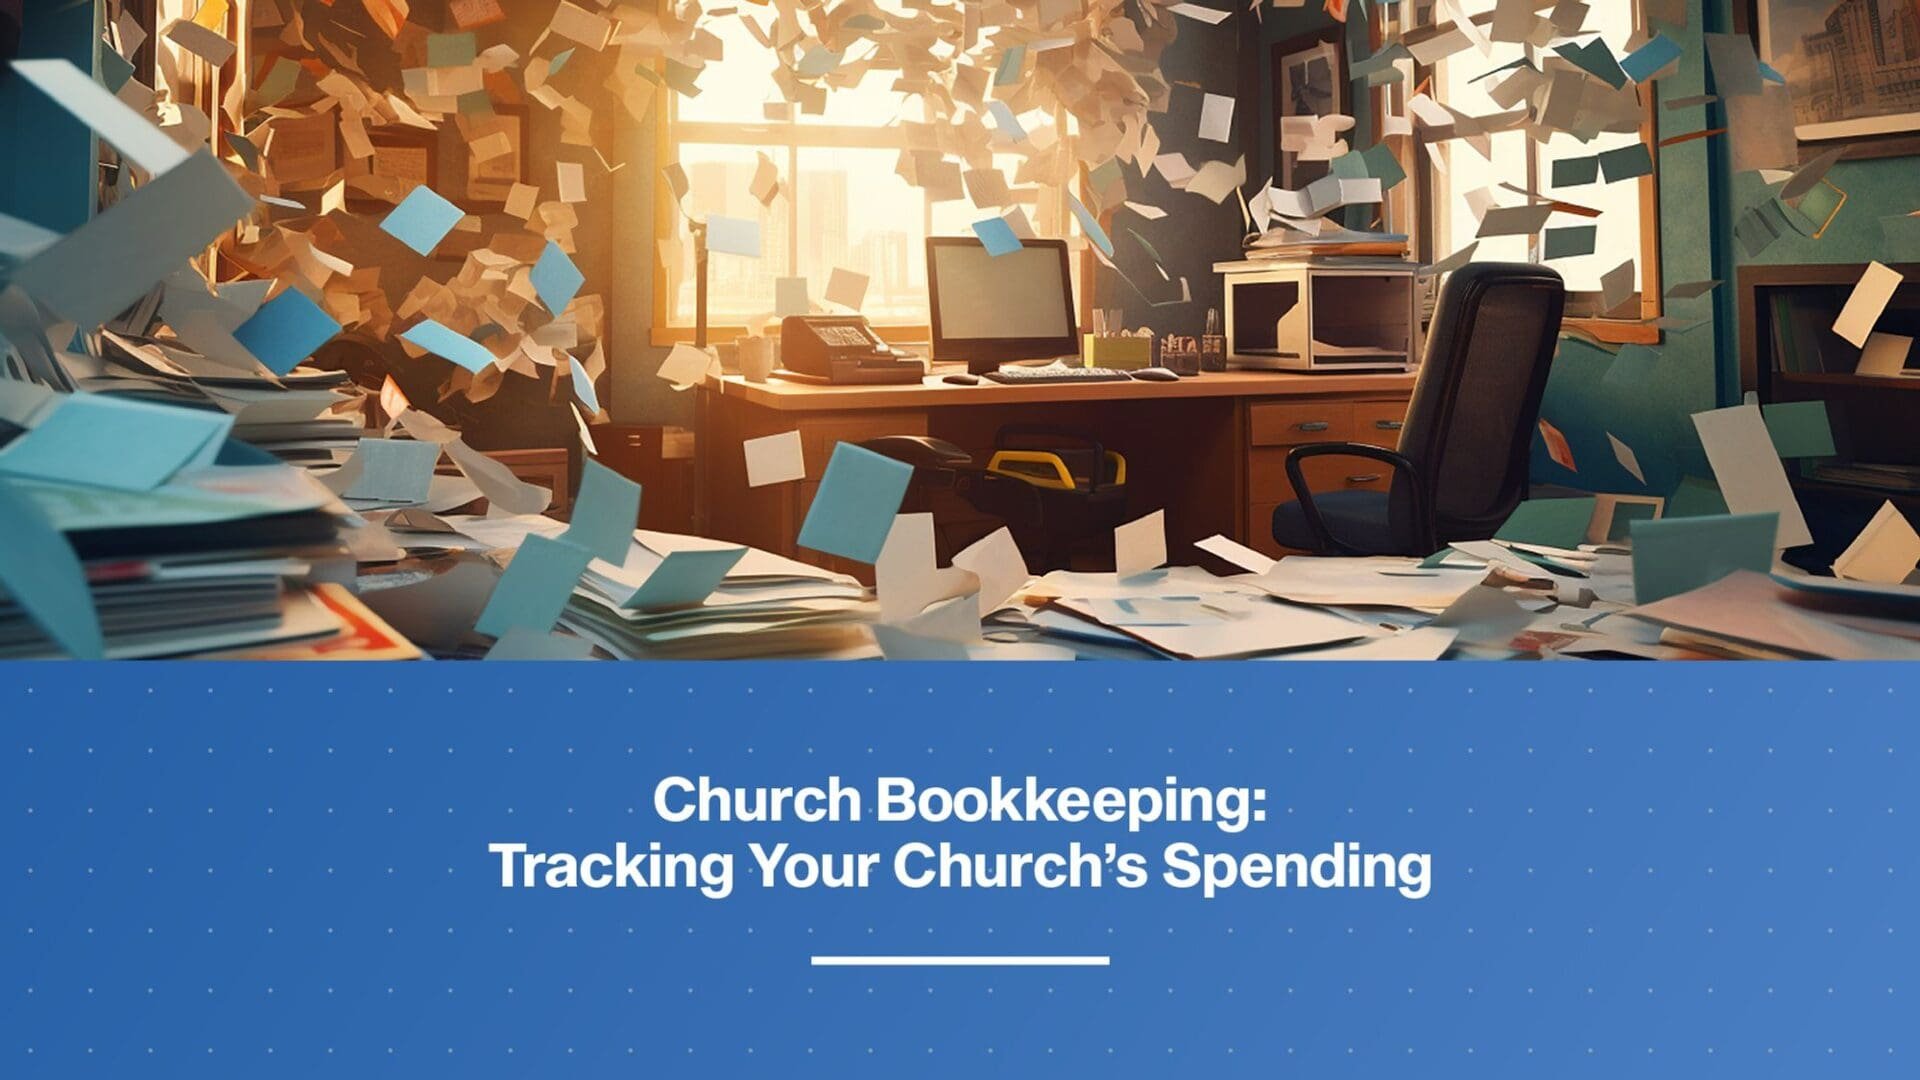 Why Bother Bookkeeping in Church? How Important Is Church Bookkeeping?